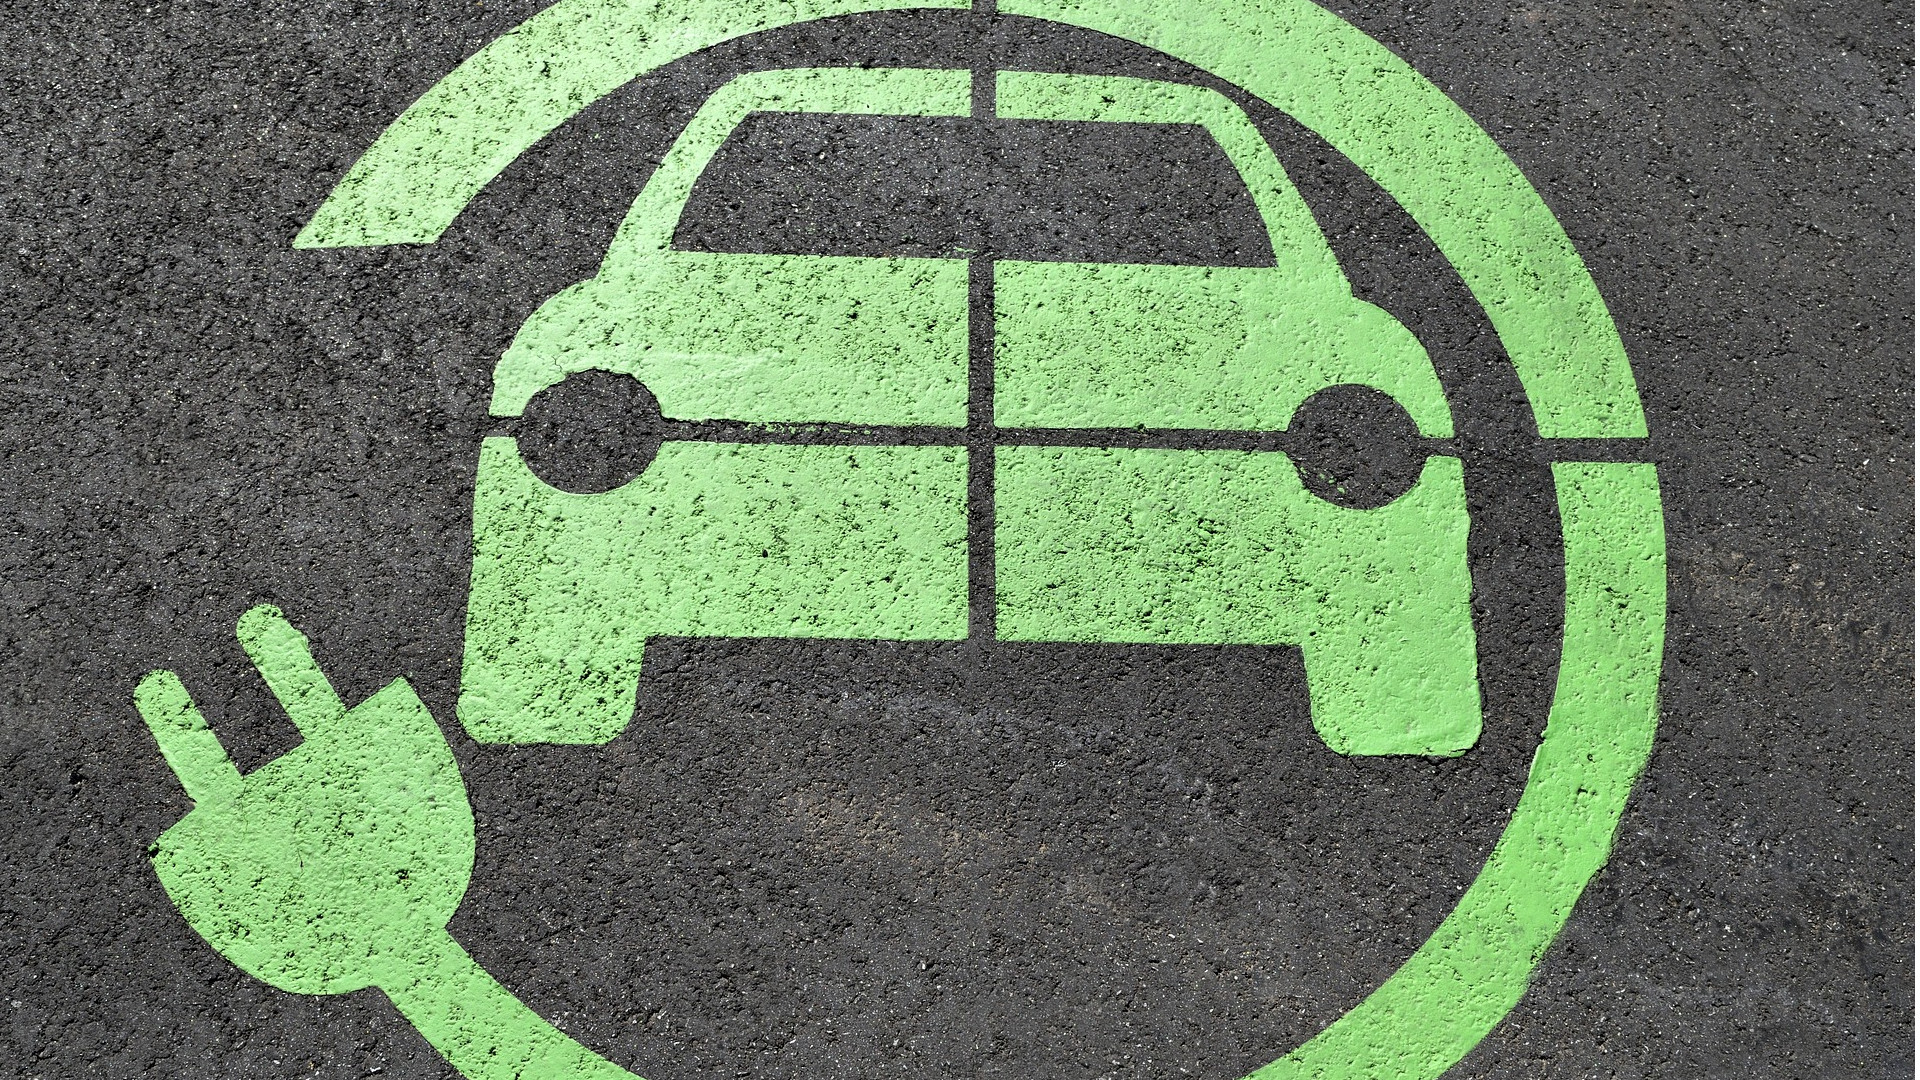 Electric vehicle charging icon on tarmac